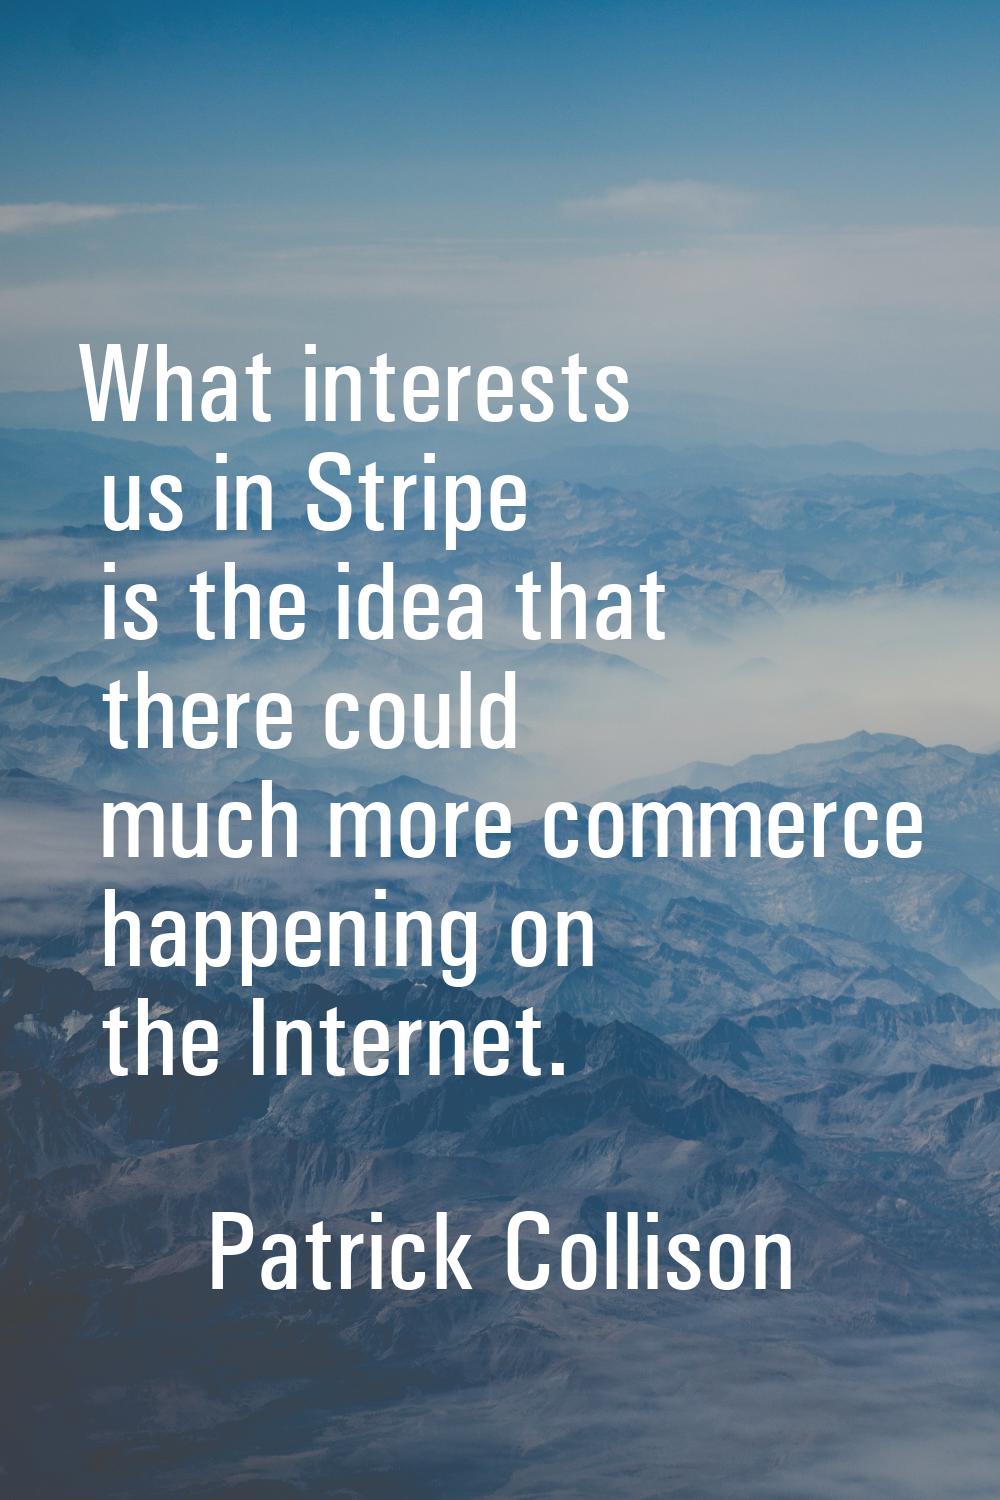 What interests us in Stripe is the idea that there could much more commerce happening on the Intern